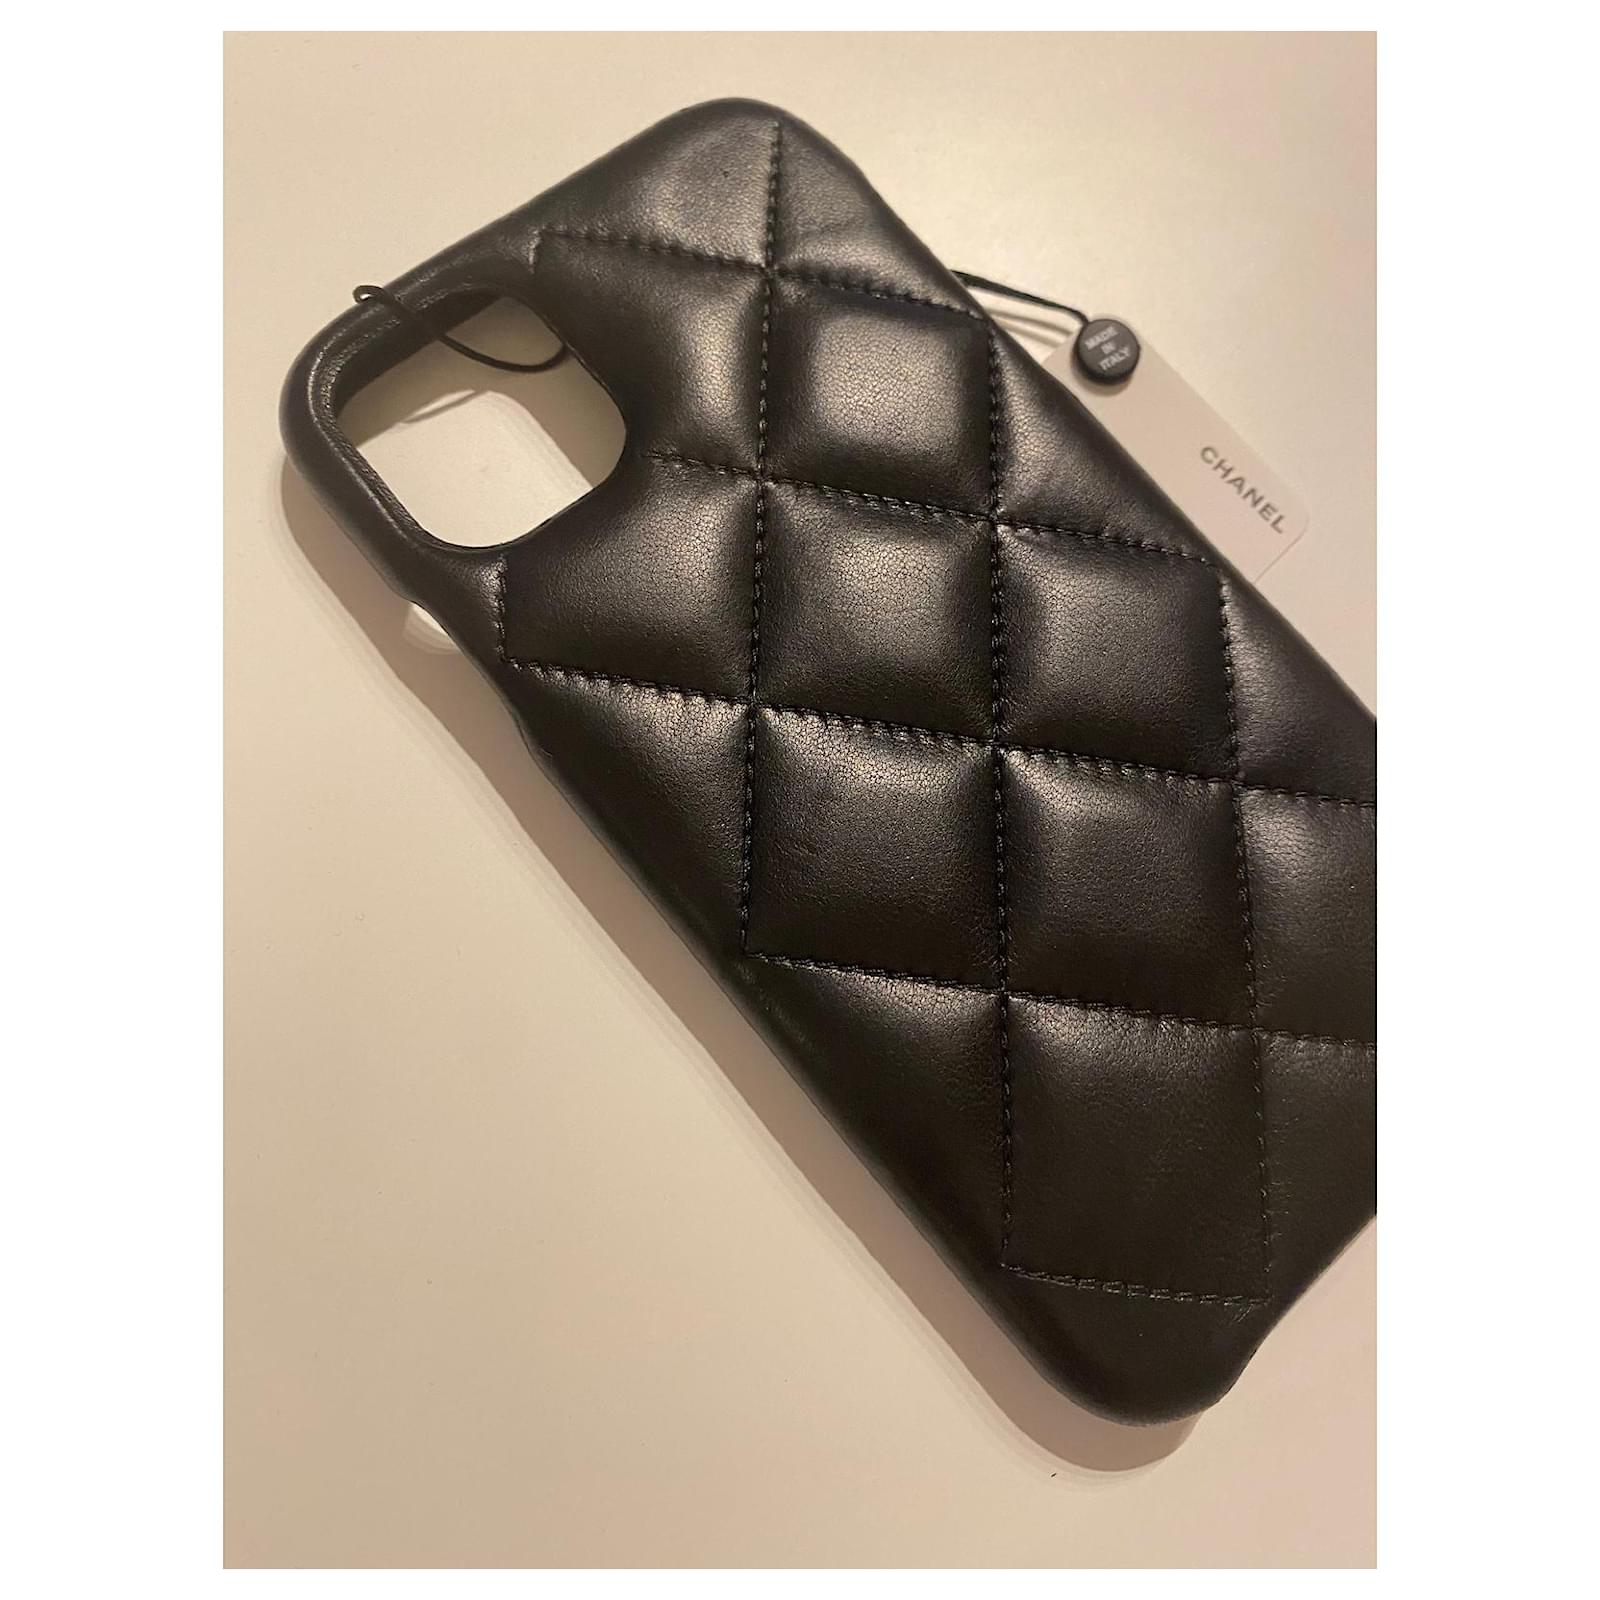 Chanel Wallet Phone Case - 5 For Sale on 1stDibs